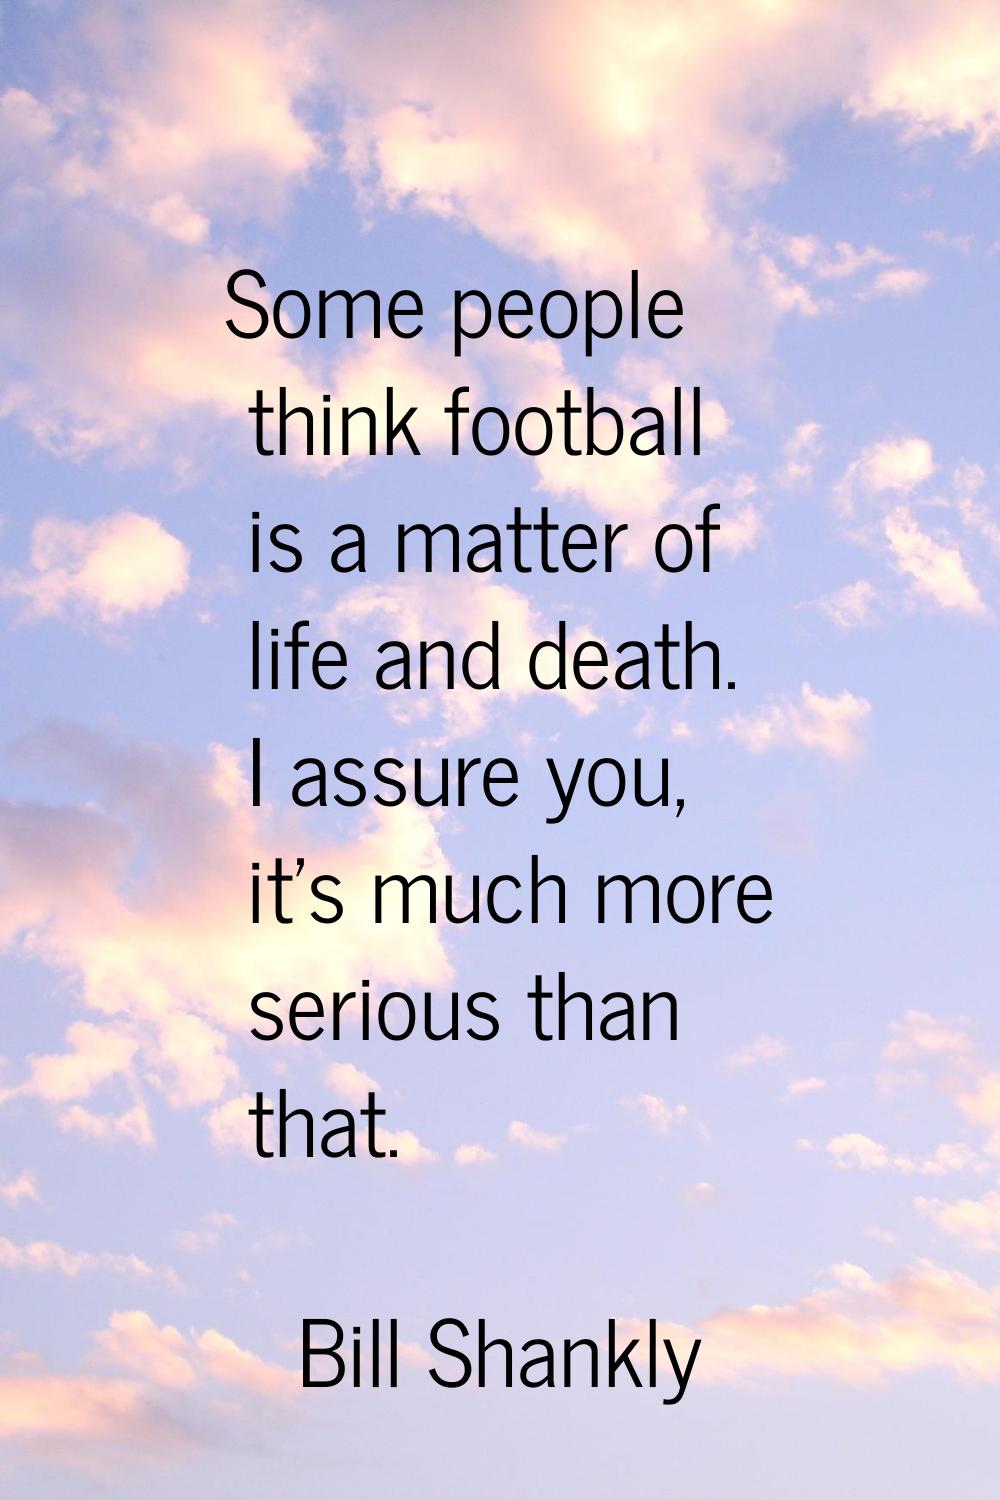 Some people think football is a matter of life and death. I assure you, it's much more serious than